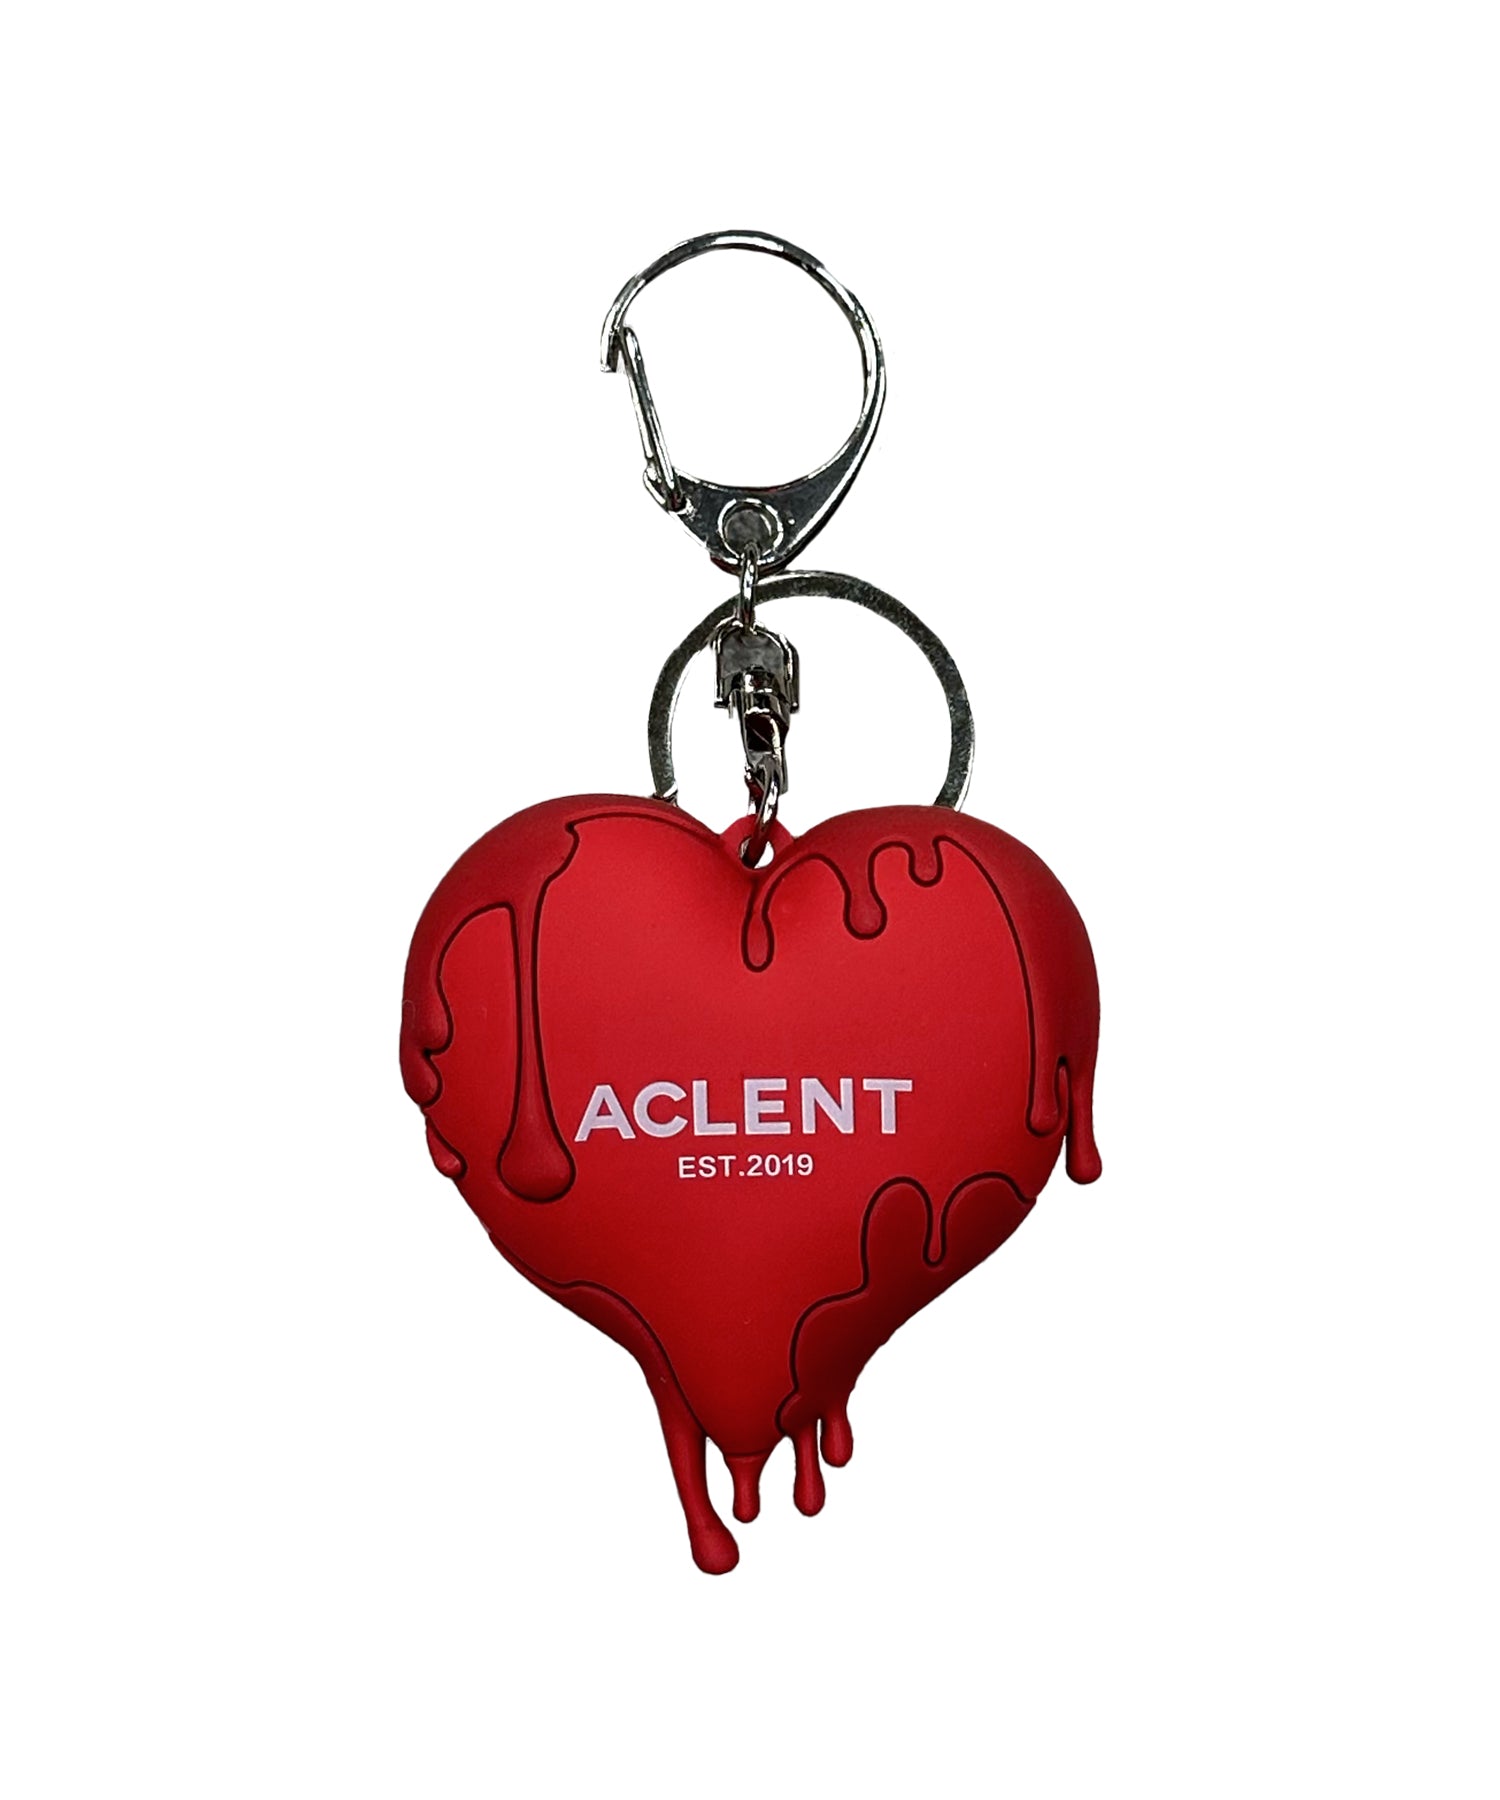 ACLENT（アクレント）ONLINE STORE